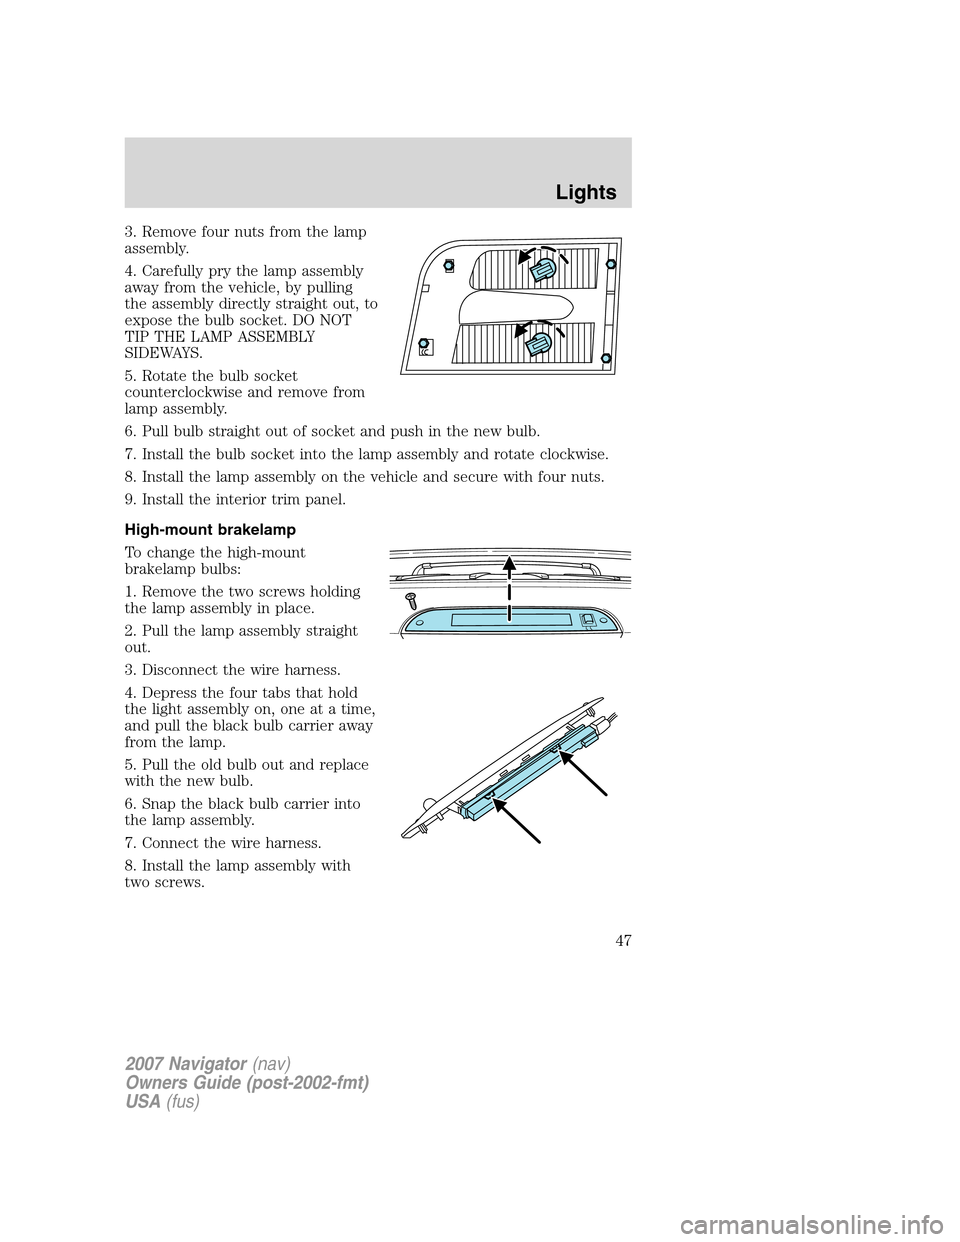 LINCOLN NAVIGATOR 2007 Service Manual 3. Remove four nuts from the lamp
assembly.
4. Carefully pry the lamp assembly
away from the vehicle, by pulling
the assembly directly straight out, to
expose the bulb socket. DO NOT
TIP THE LAMP ASSE